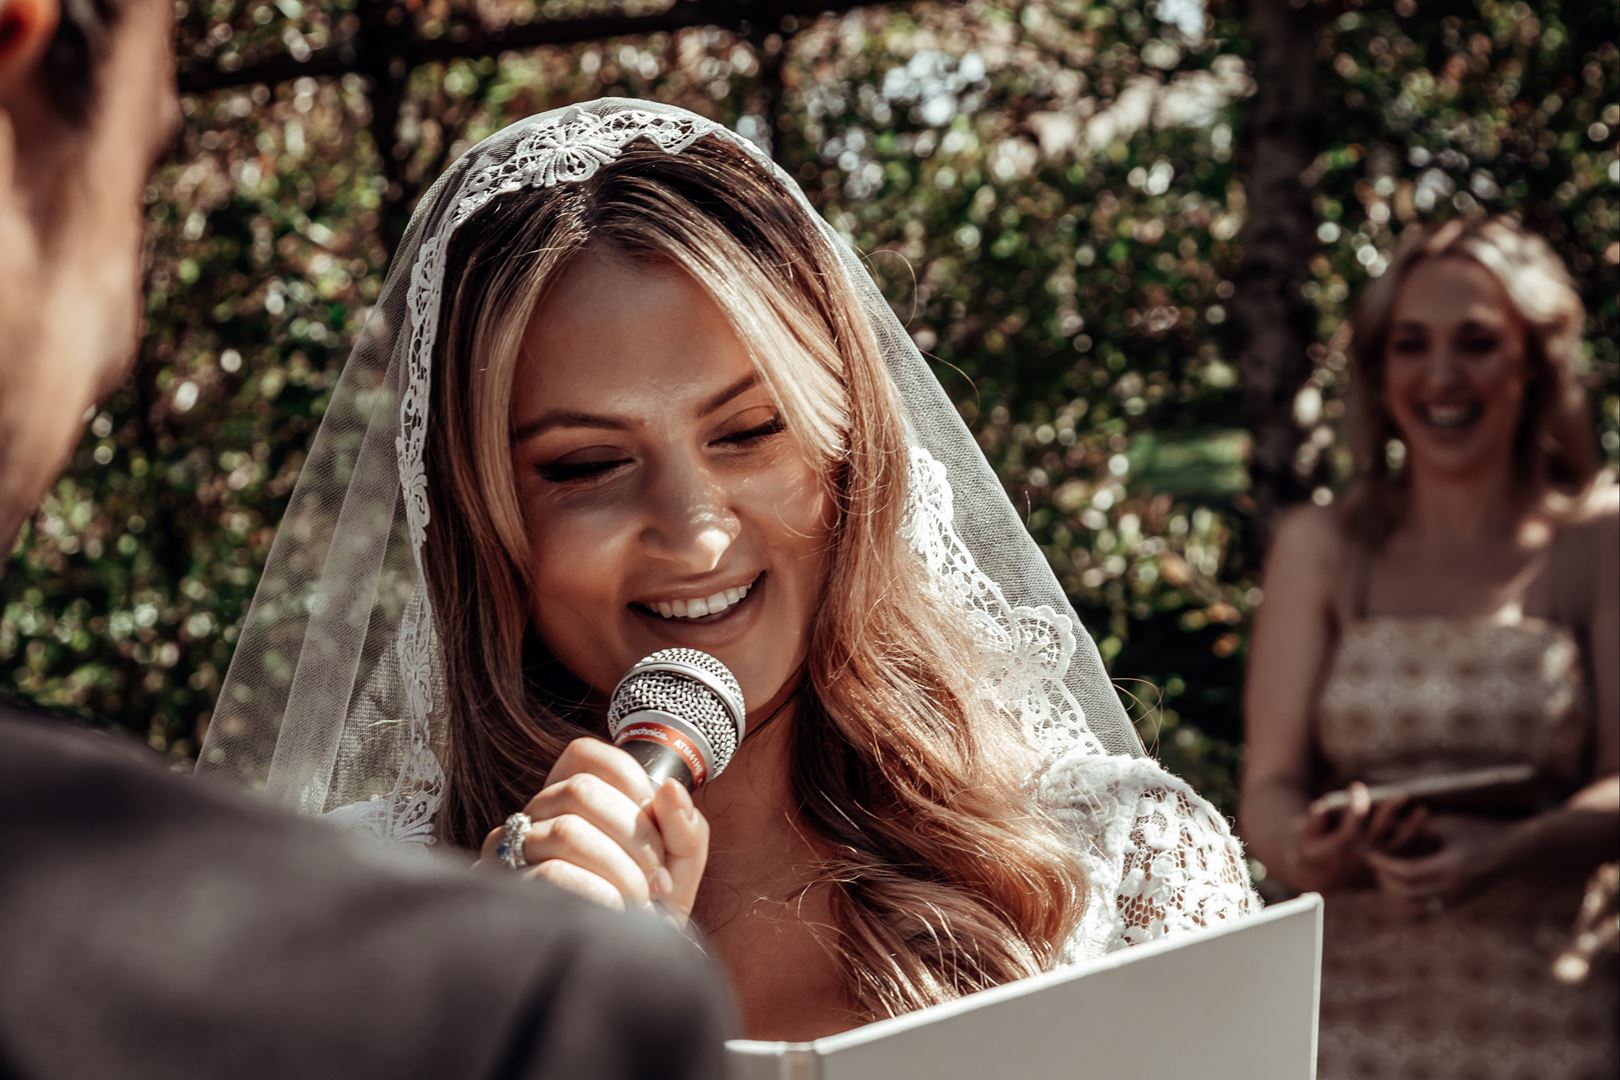 Wedding vows inspired by famous poets 